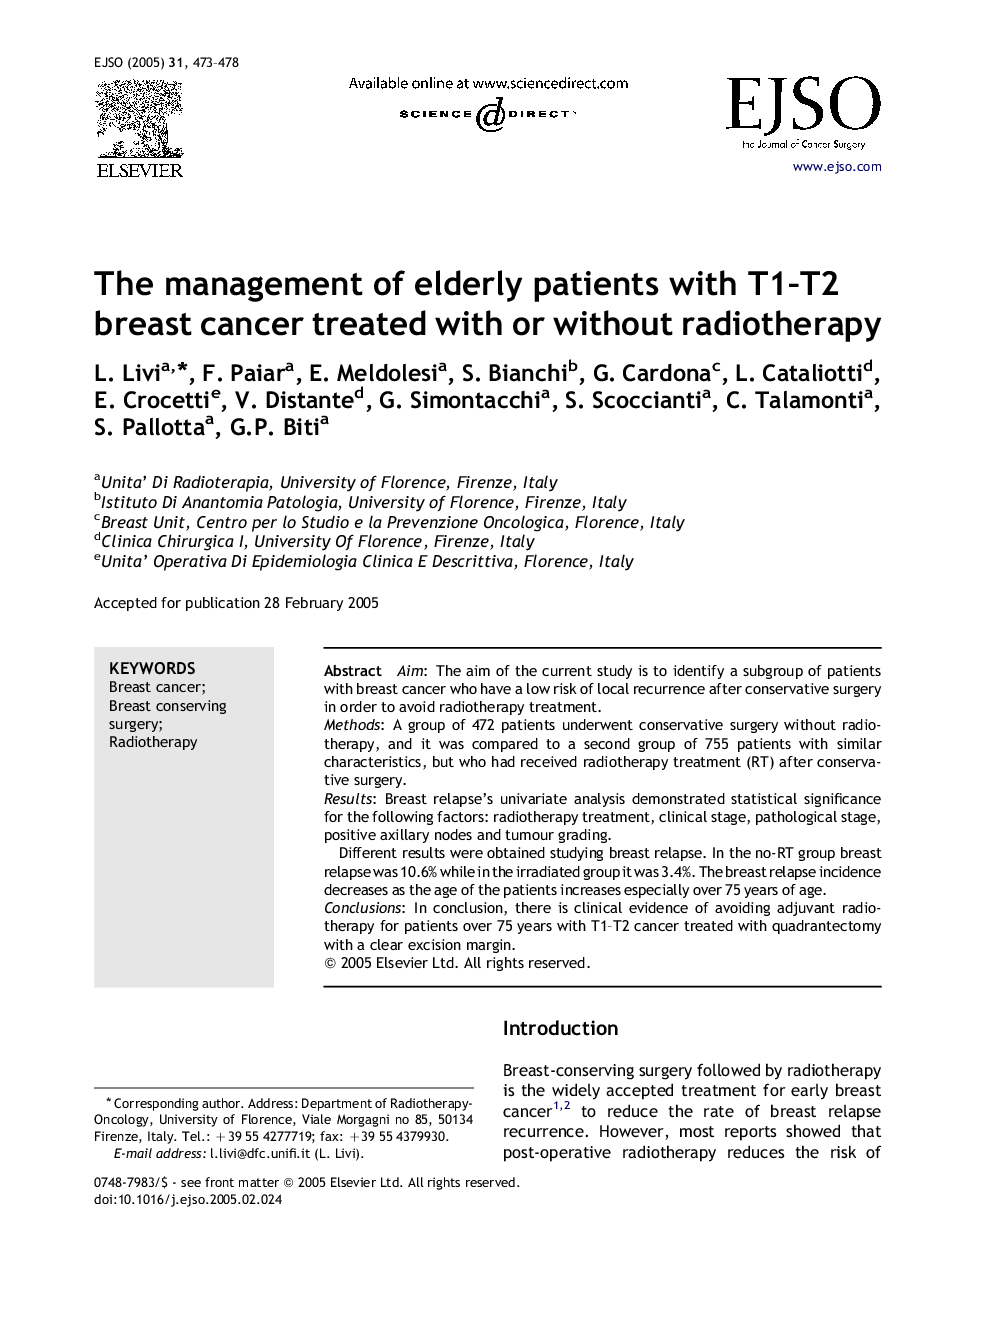 The management of elderly patients with T1-T2 breast cancer treated with or without radiotherapy